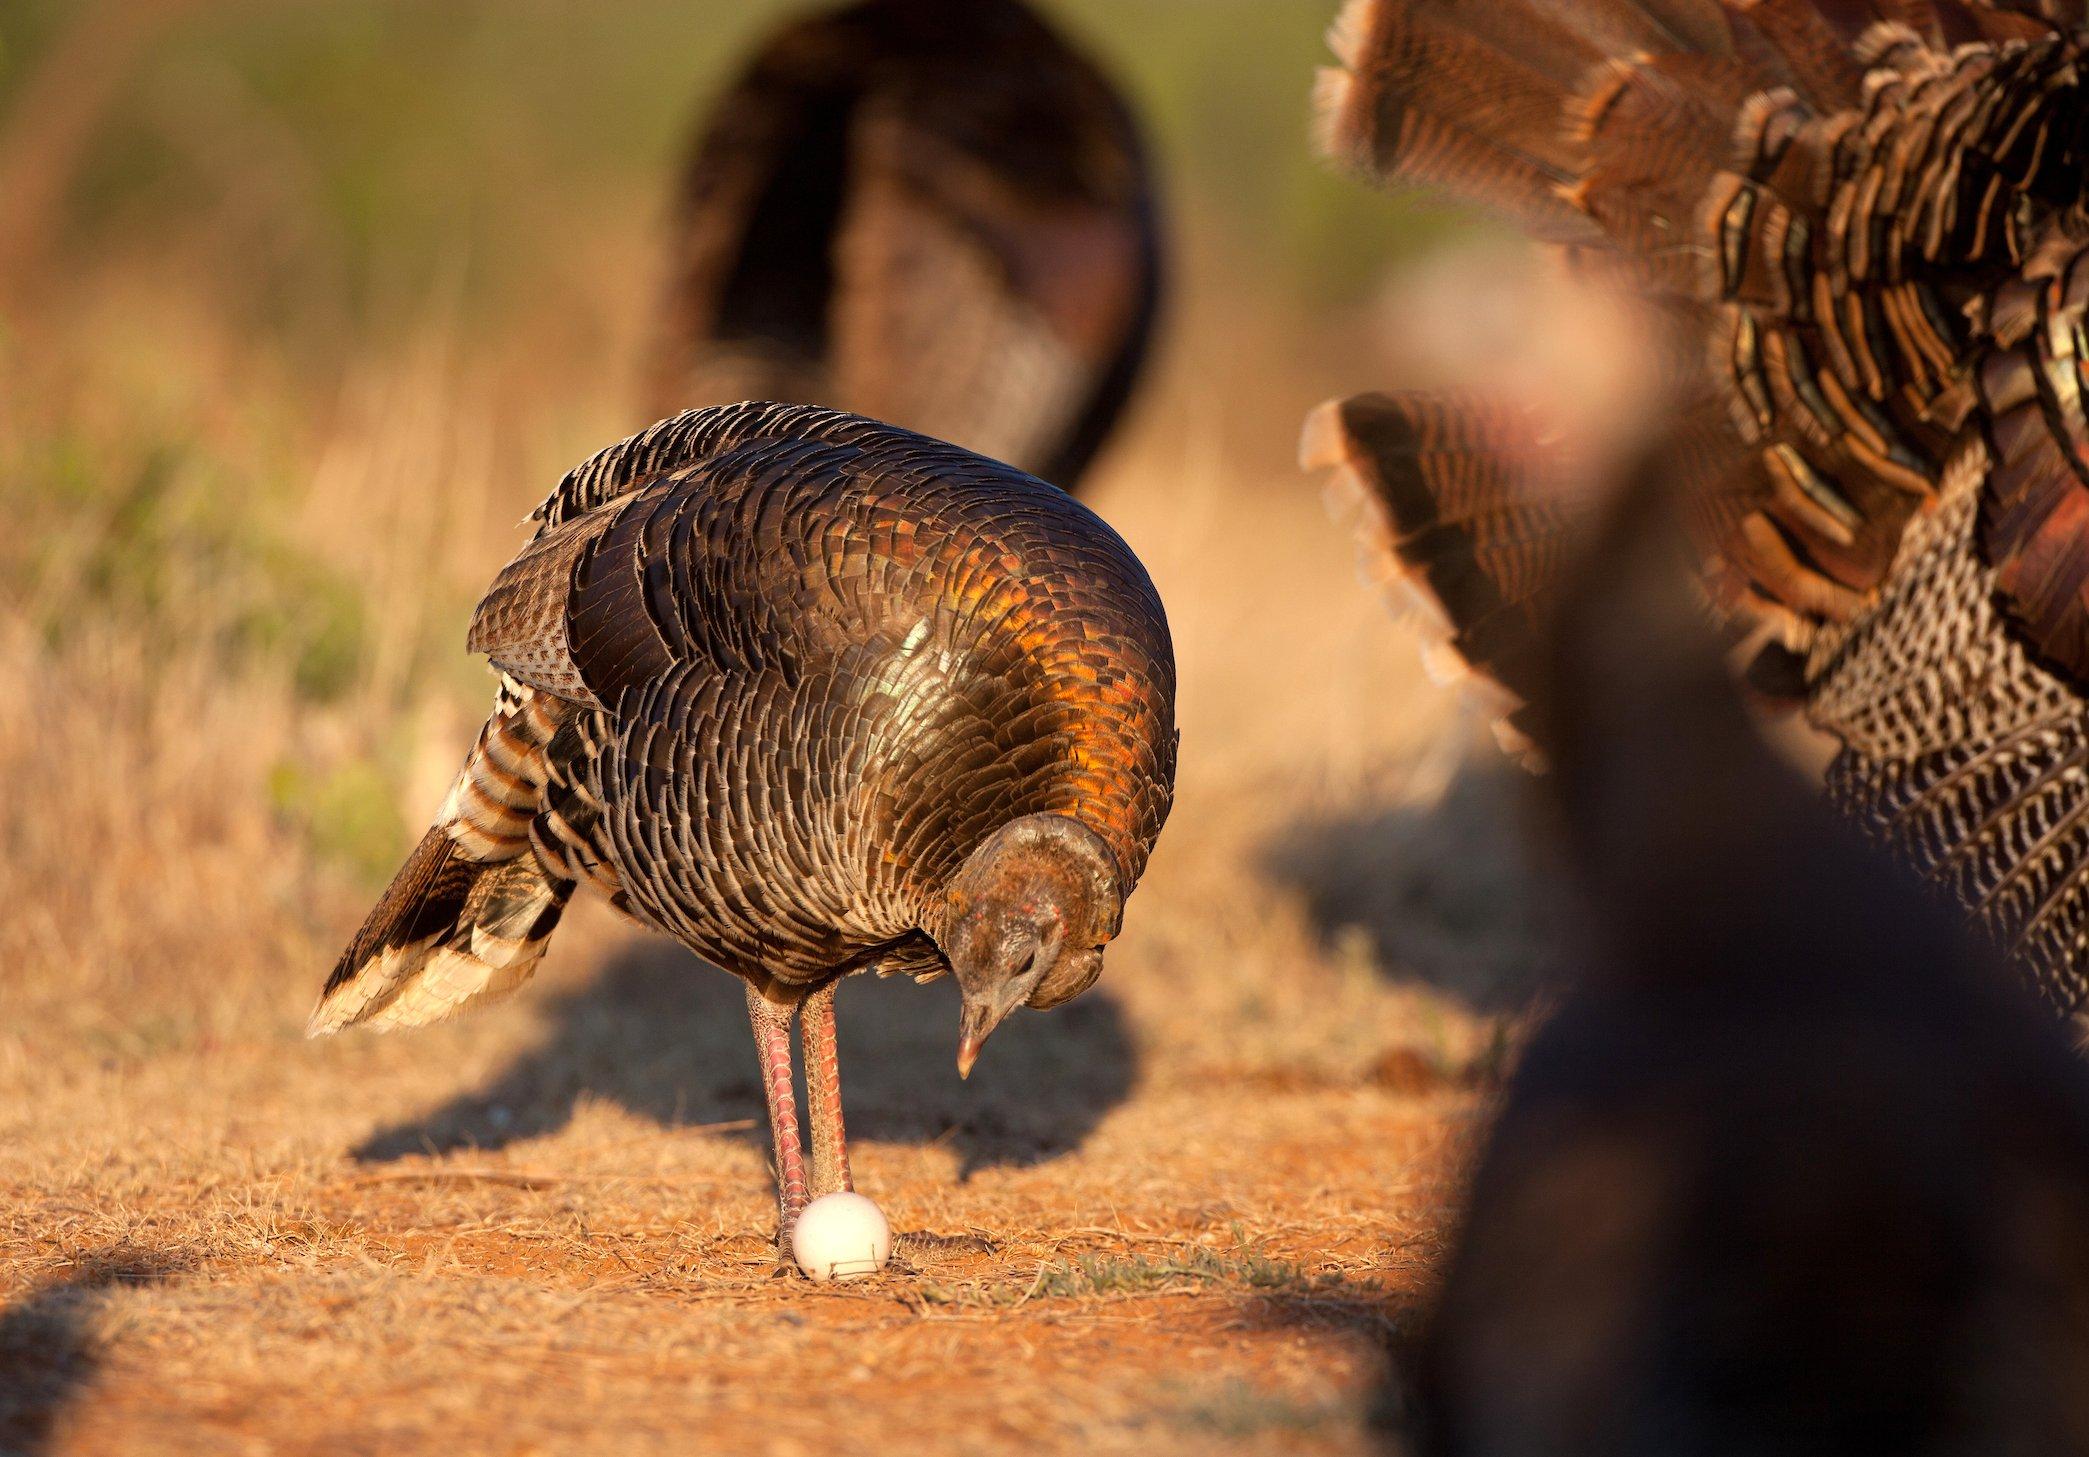 Wild turkeys thrived on the continent when the first Europeans arrived. Image by Russell Graves